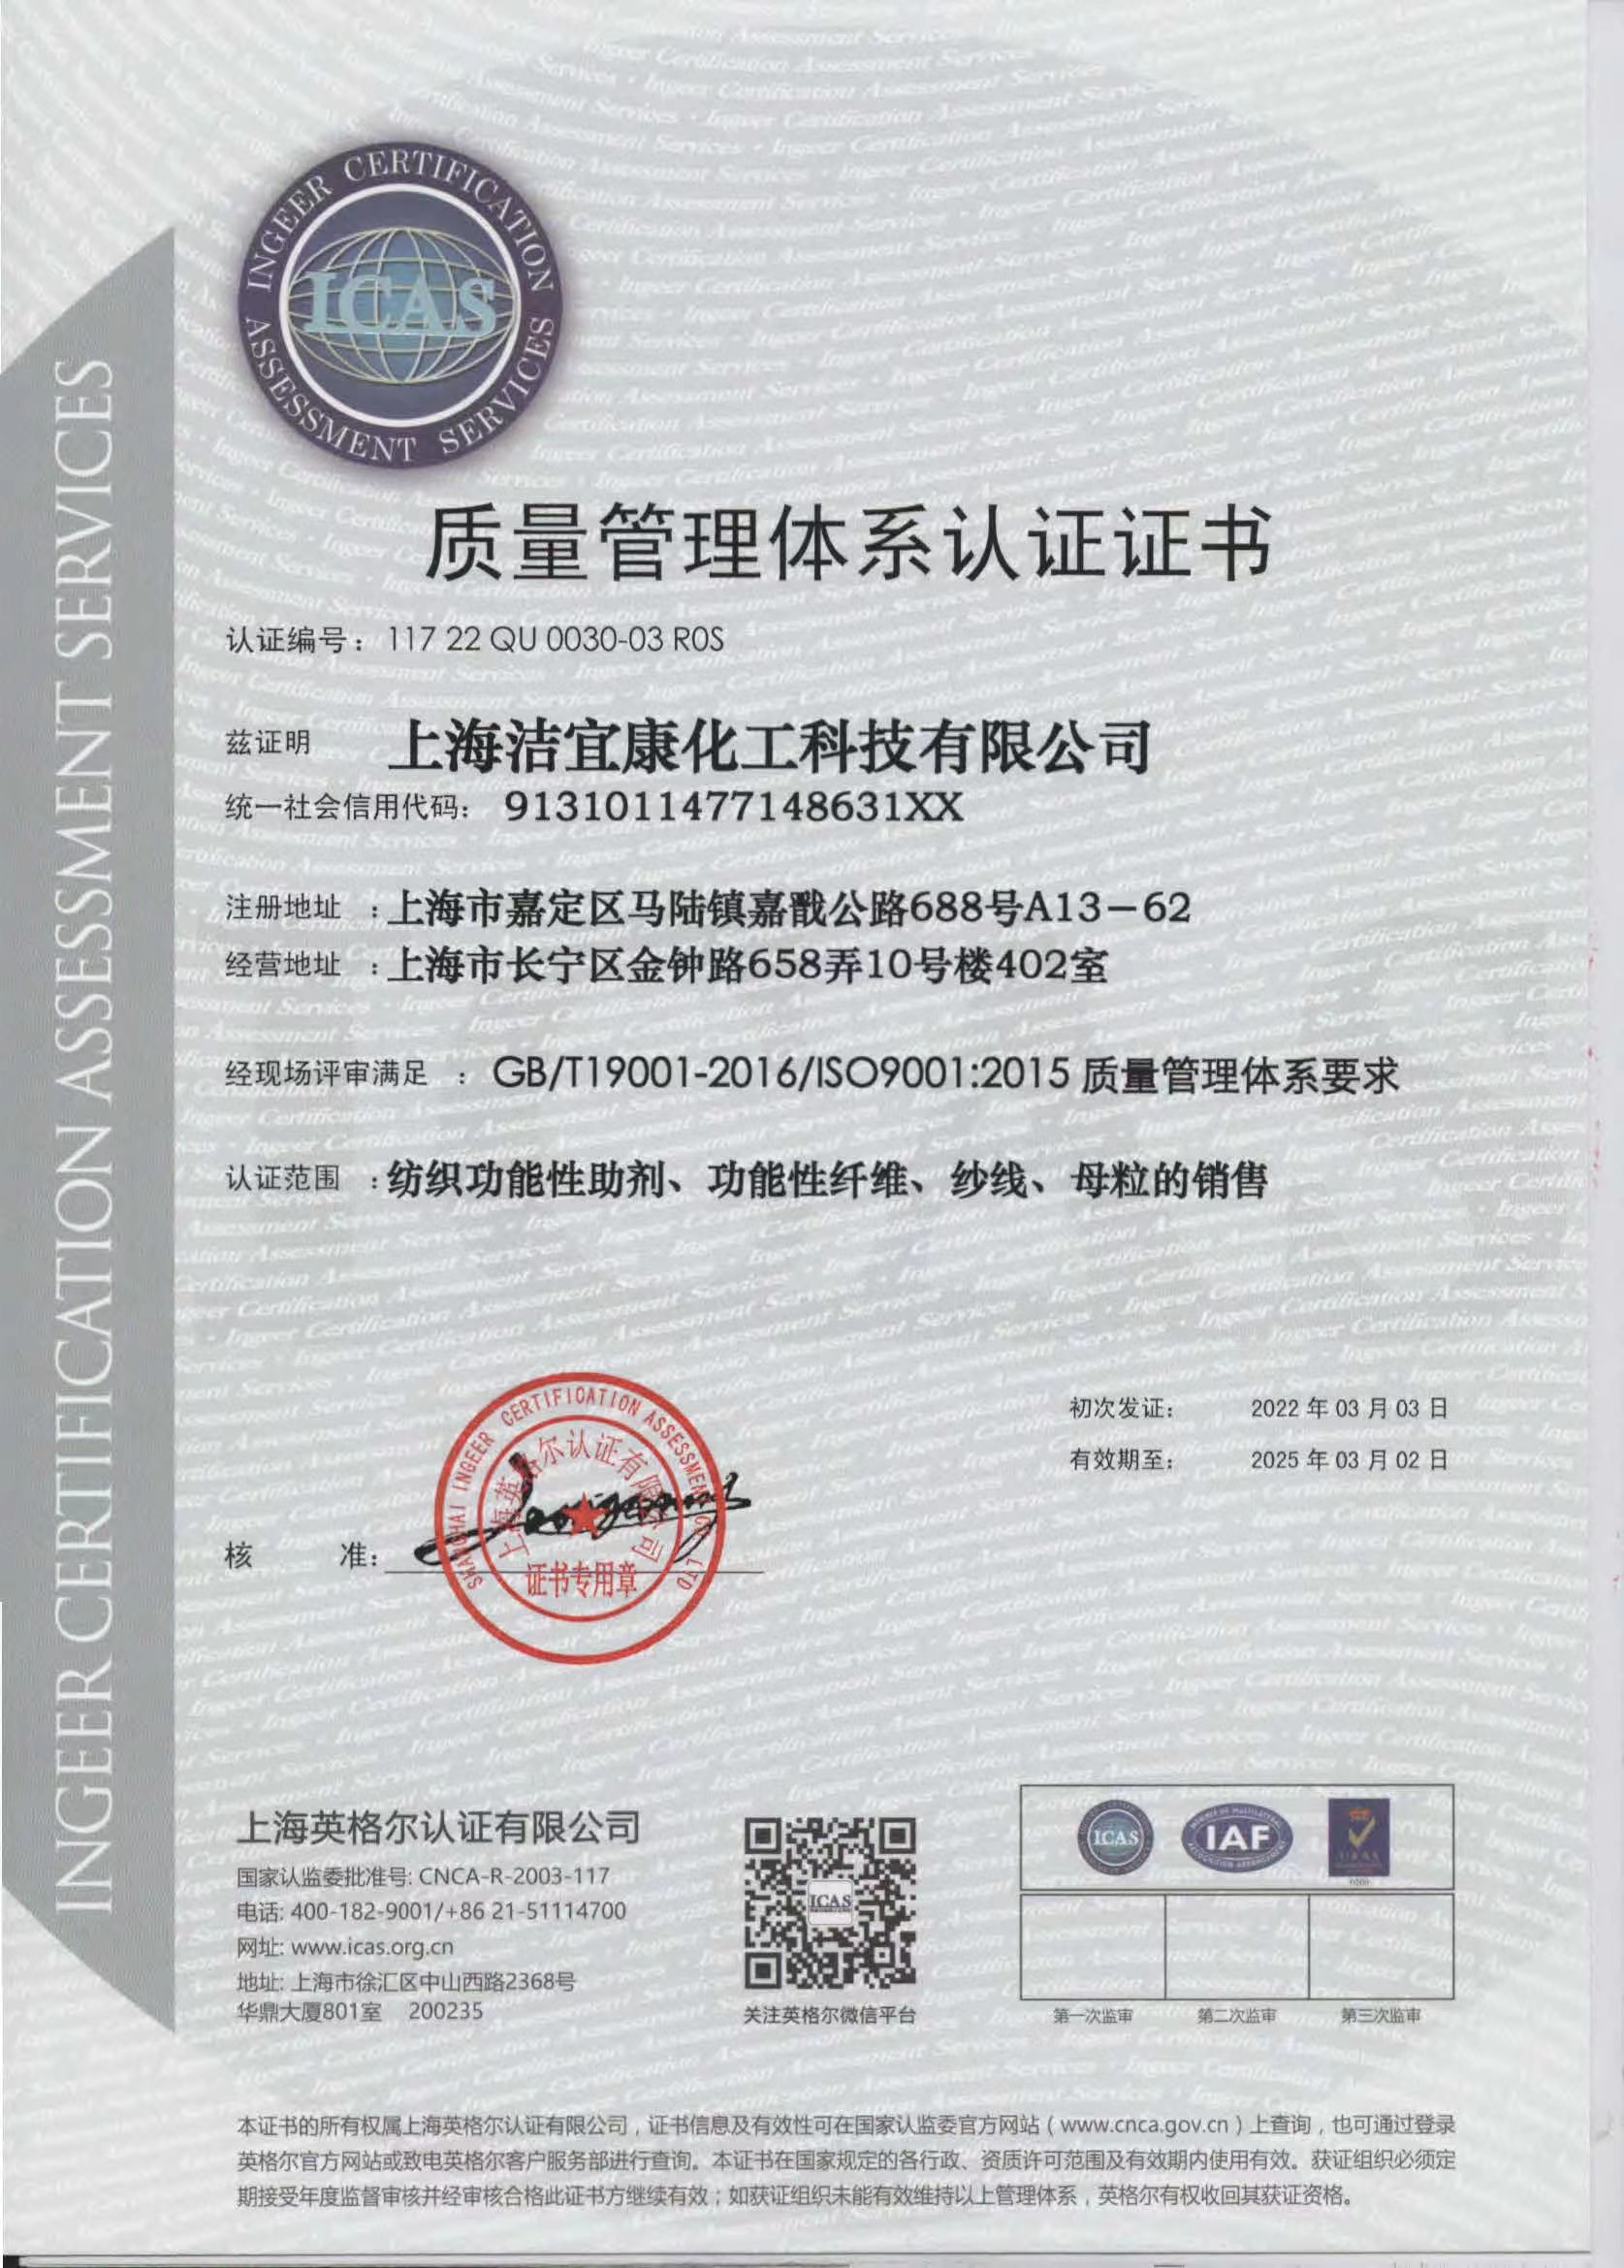 Quality management system Certificate in Chinese